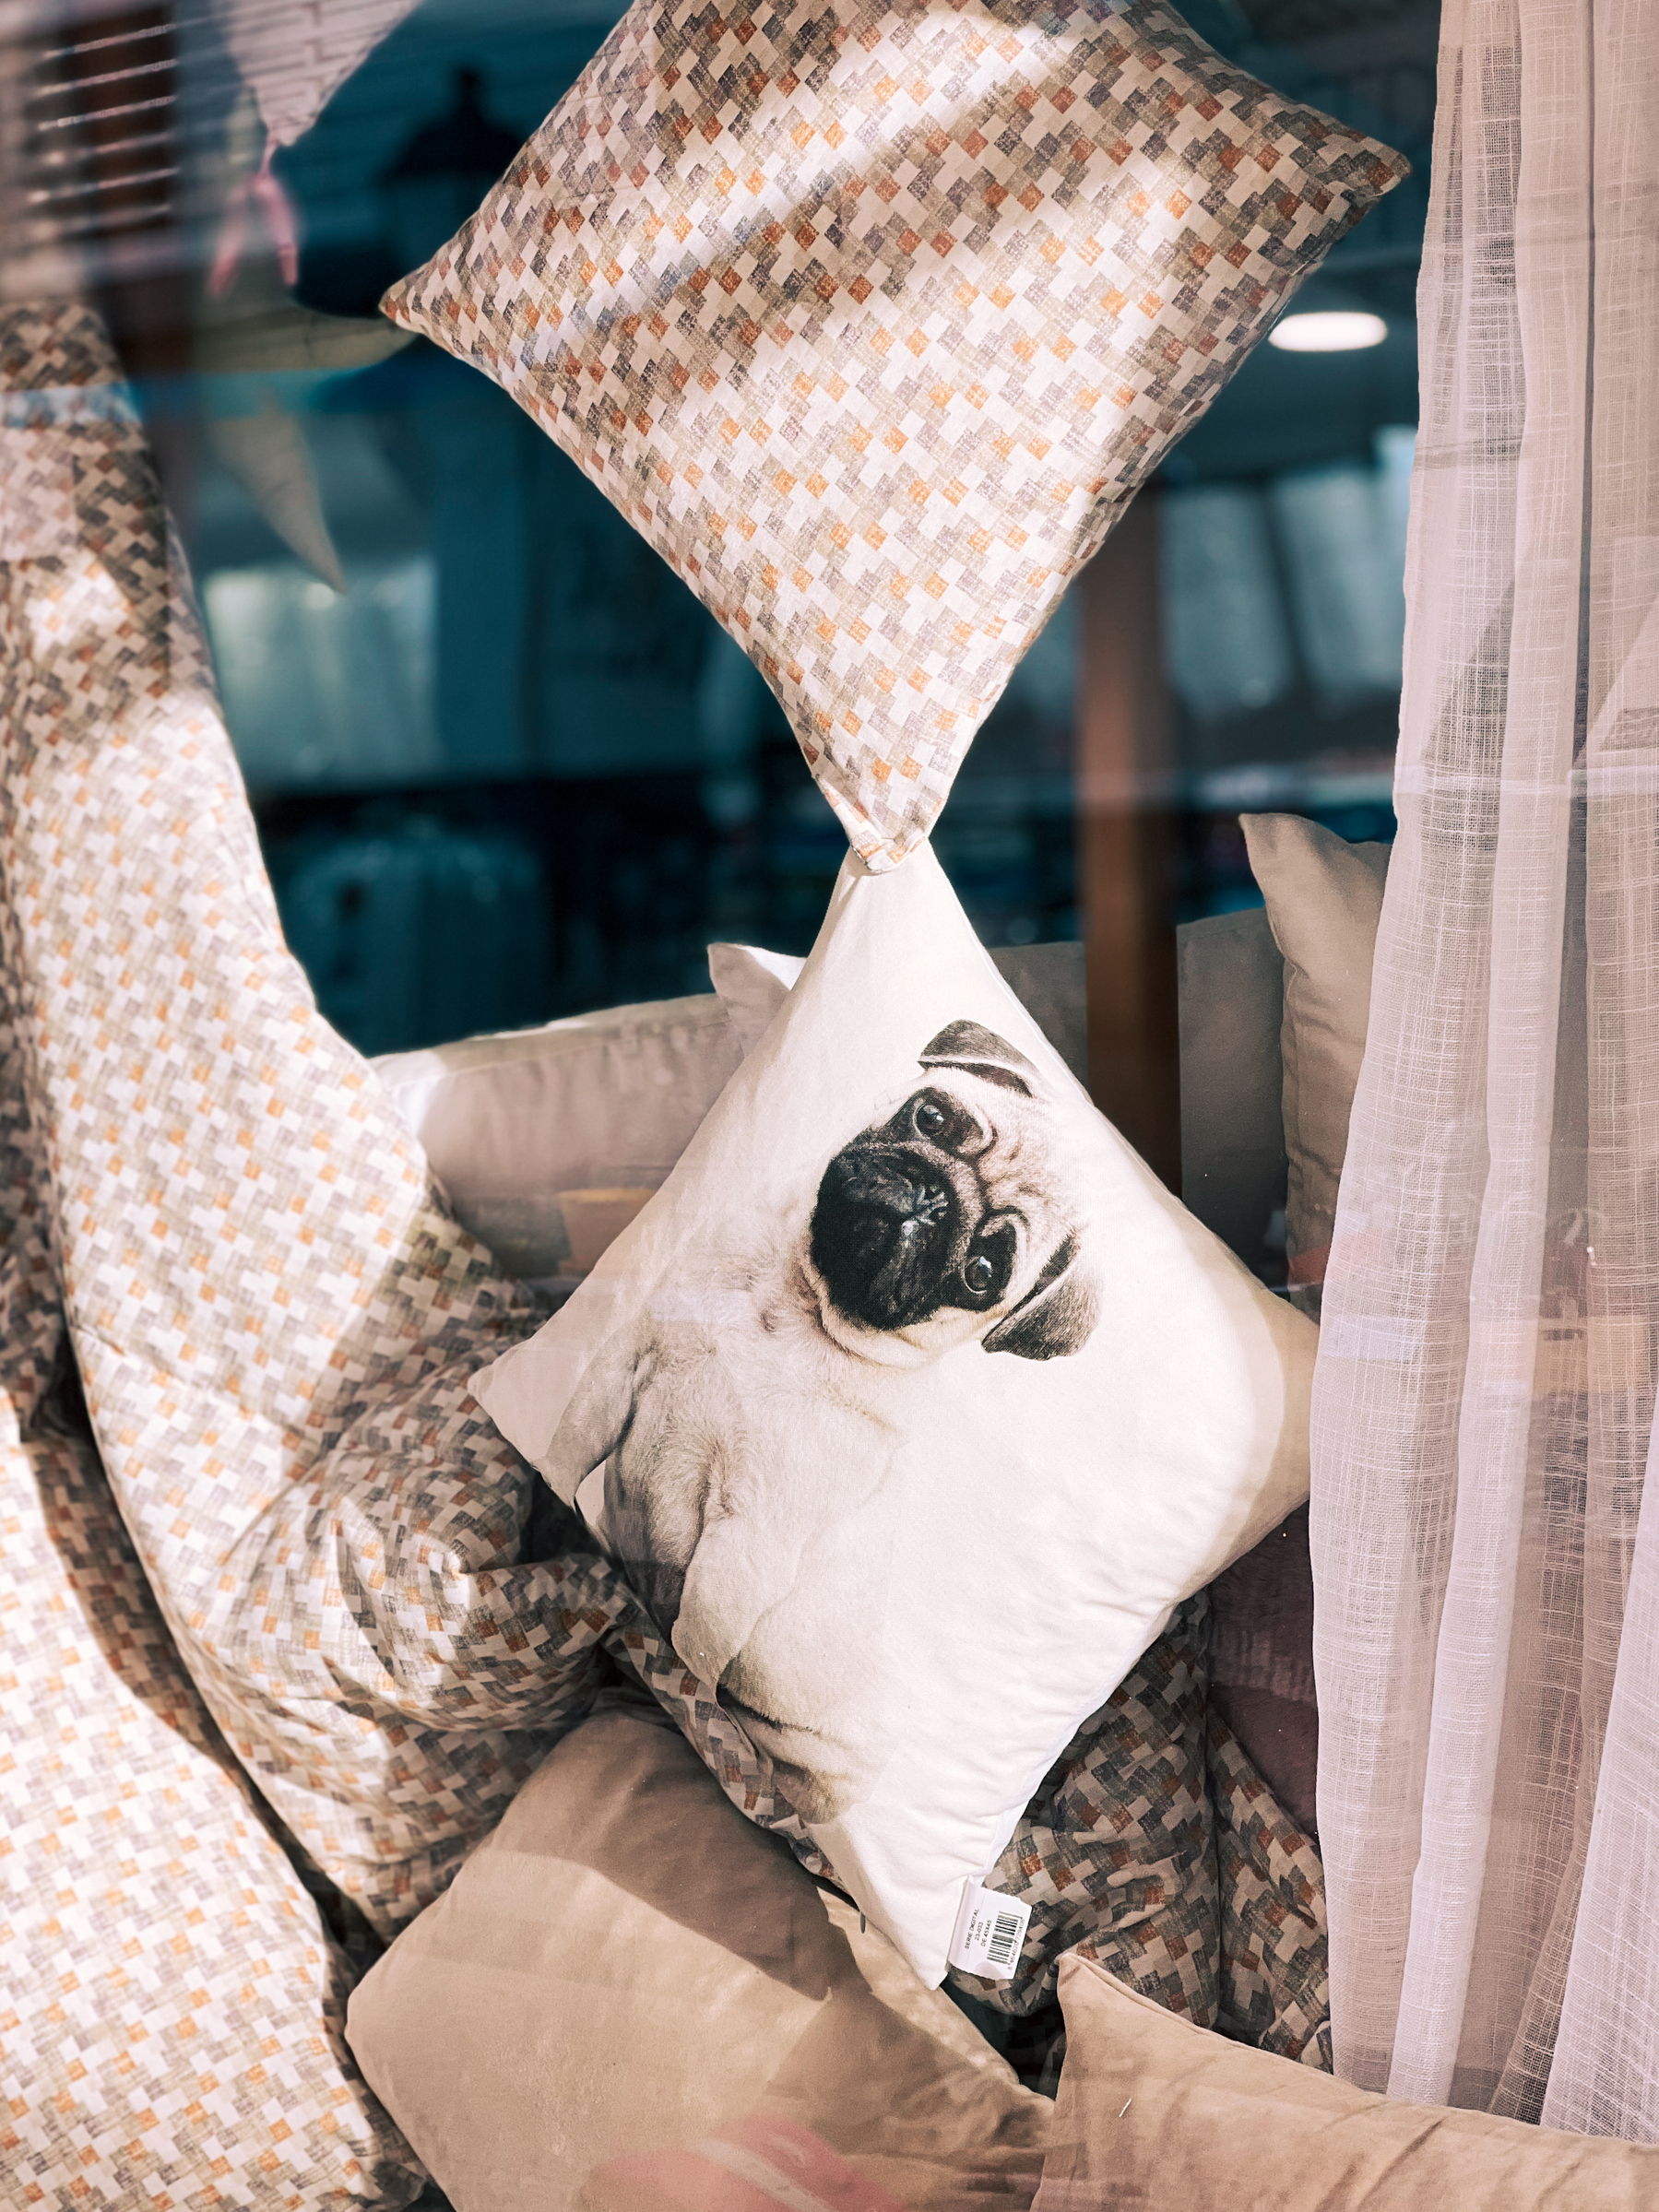 Shop window with a pillow with a dog on the pillow case. 